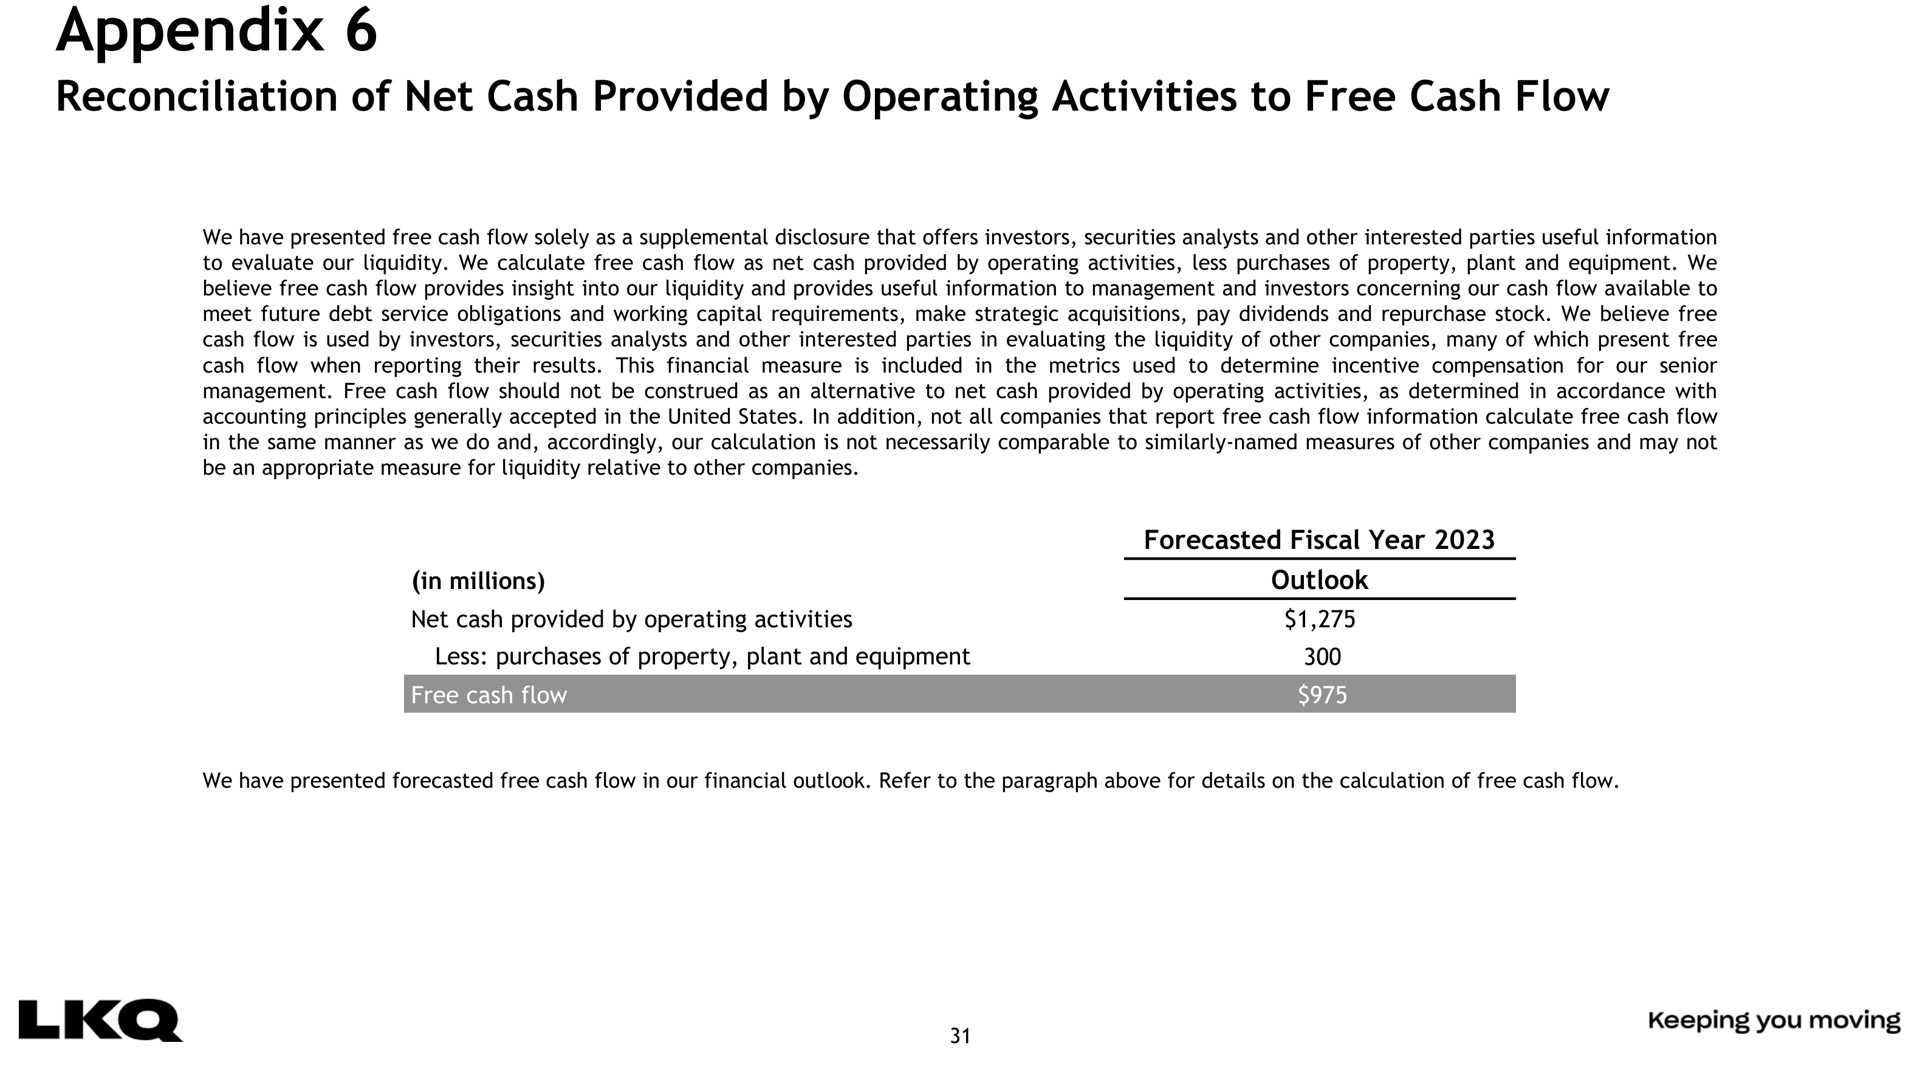 appendix reconciliation of net cash provided by operating activities to free cash flow | LKQ